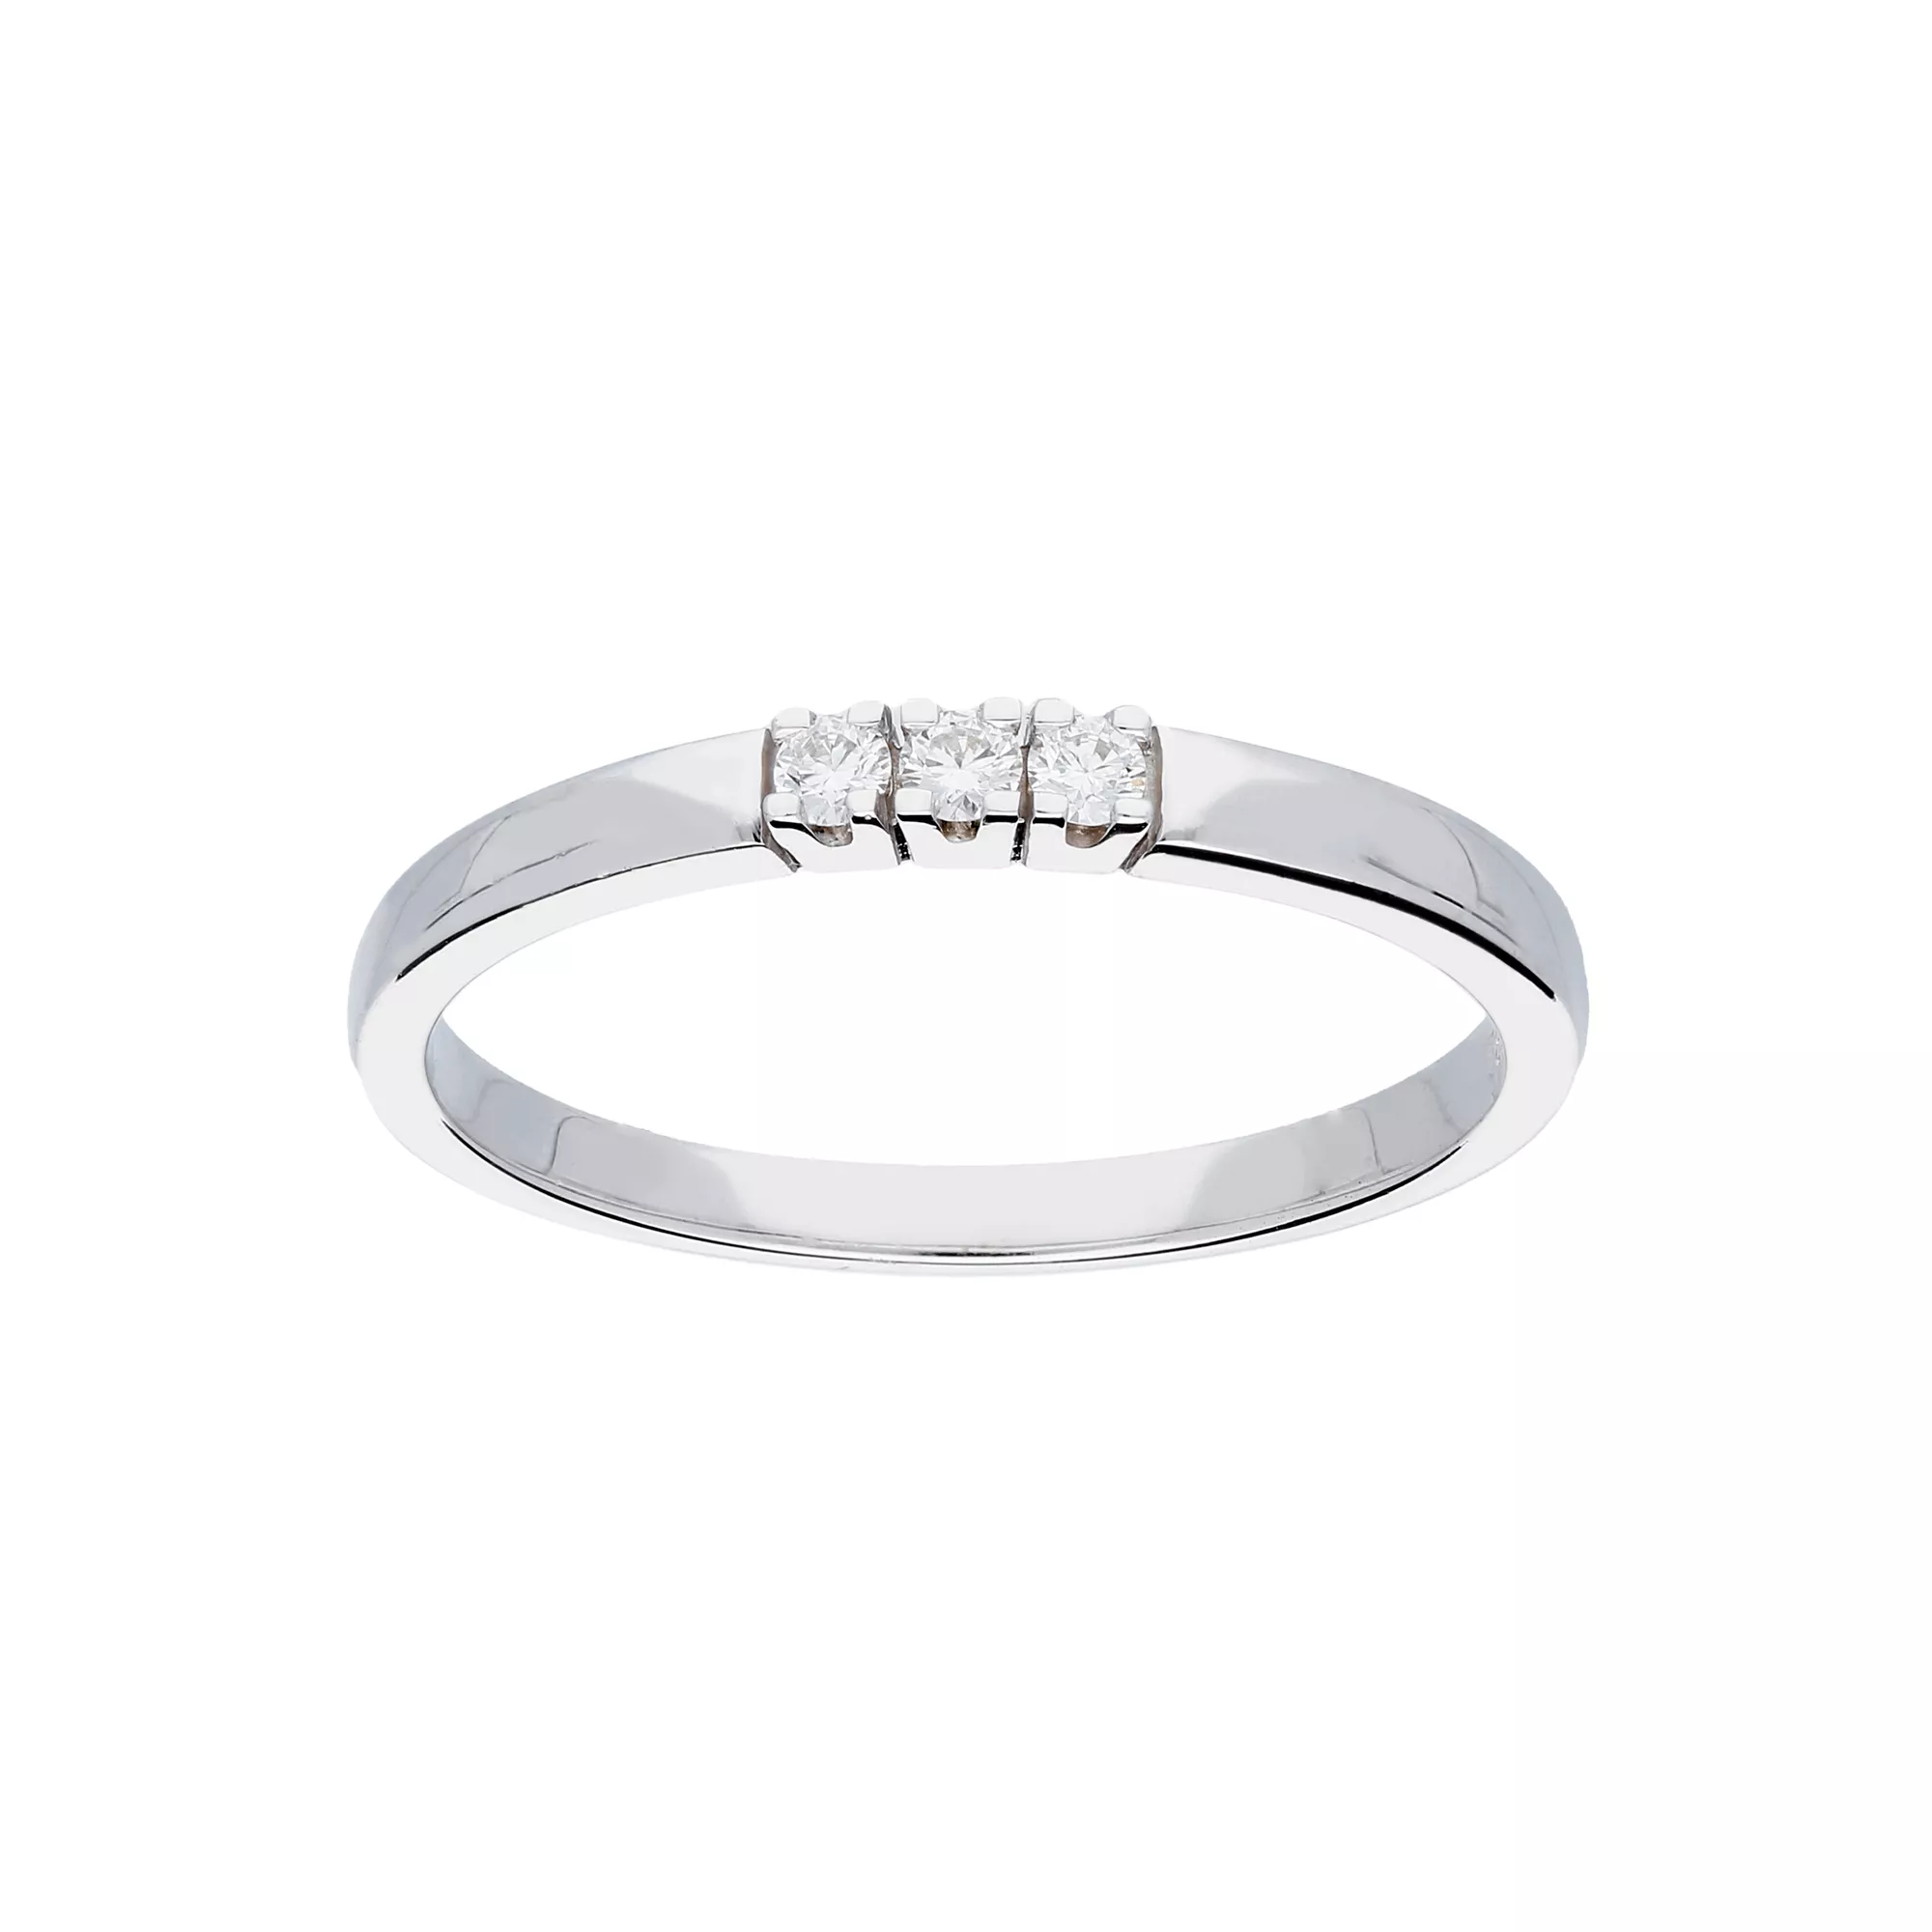 Glow Witgouden Ring - Glanzend Diamant 3- 0.06ct G/si 214.3016.50